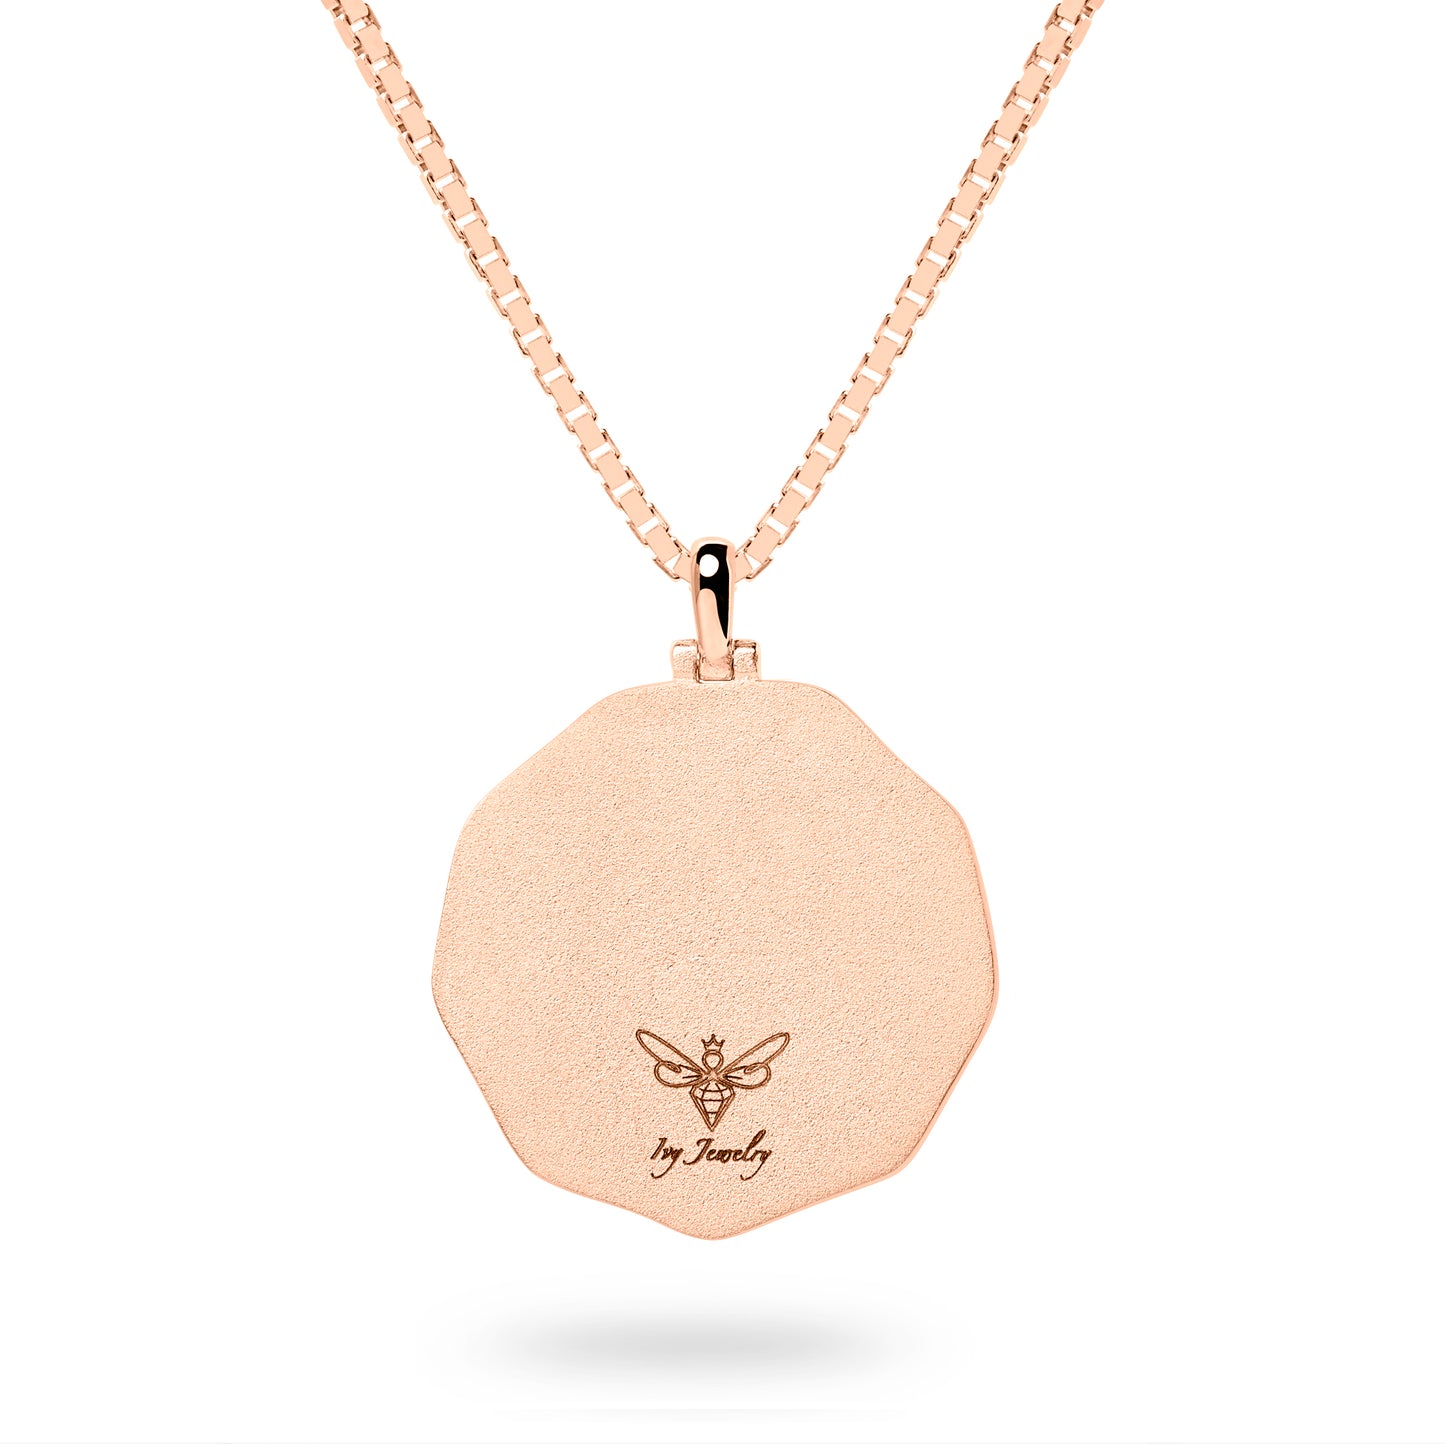 “Tree of Life” Pendant Necklace (Gold)